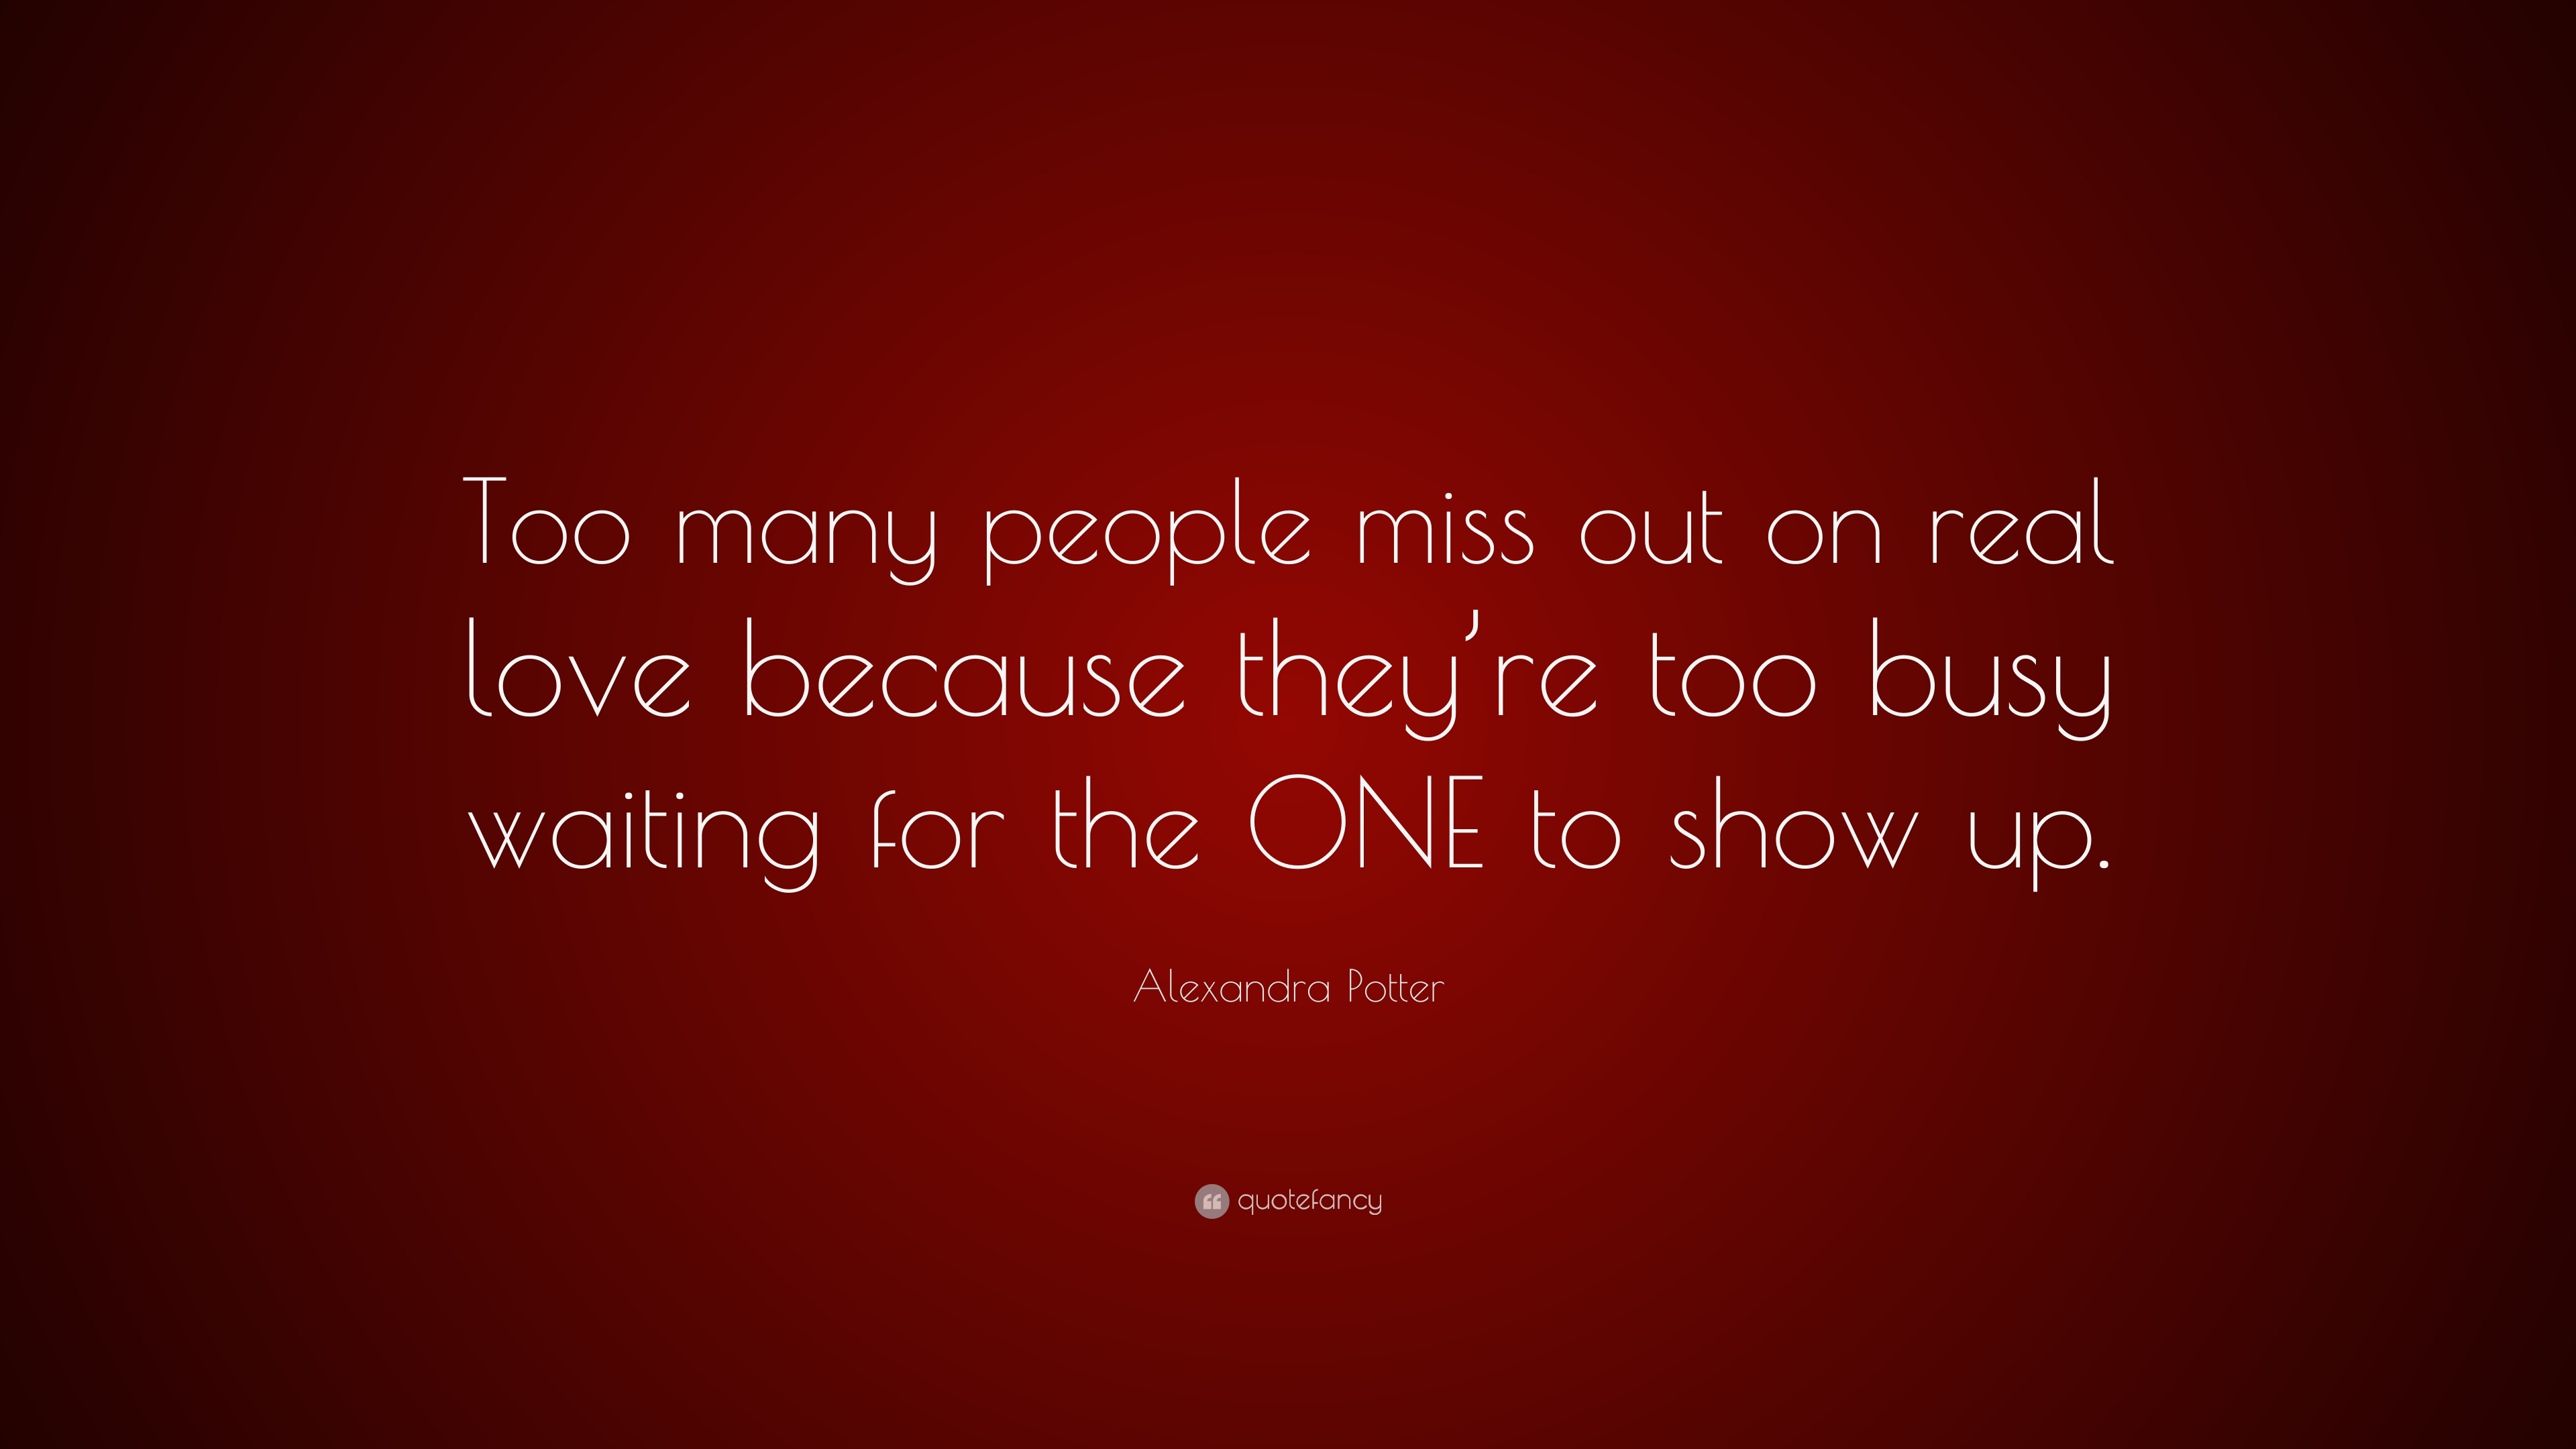 Alexandra Potter Quote Too Many People Miss Out On Real Love Because They Re Too Busy Waiting For The One To Show Up 7 Wallpapers Quotefancy